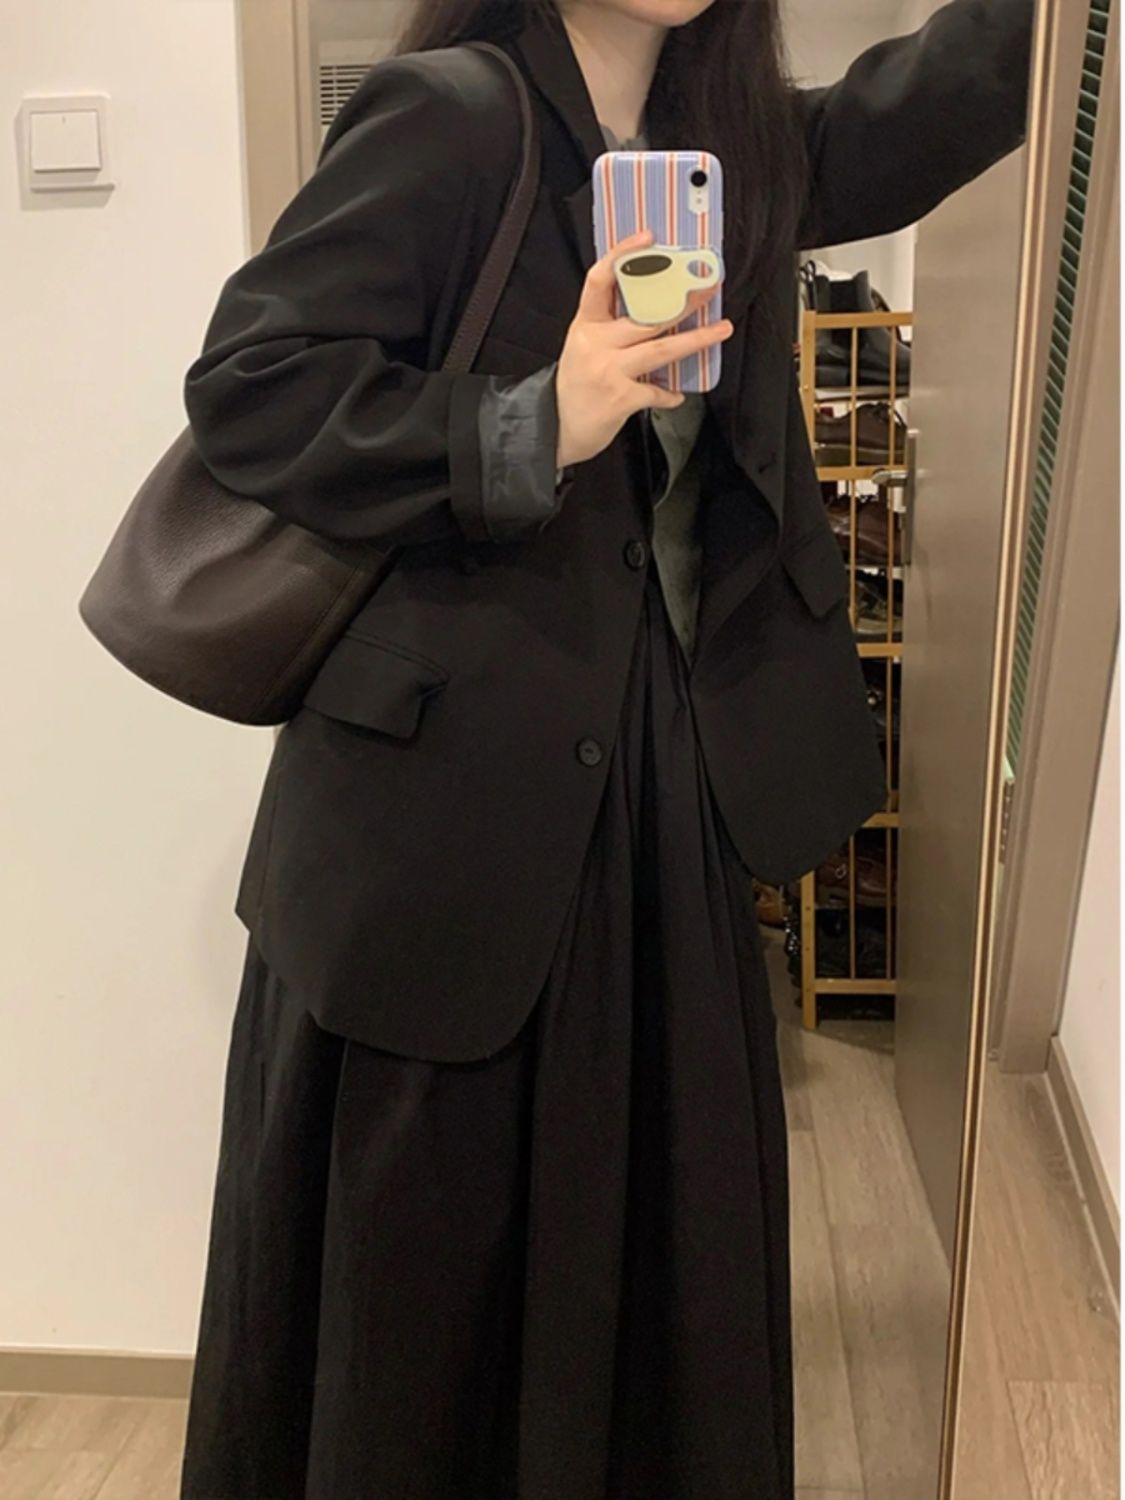 Black suit jacket for women, Korean spring and autumn style, slim, casual, single-breasted, casual, versatile, internet celebrity, trendy street suit